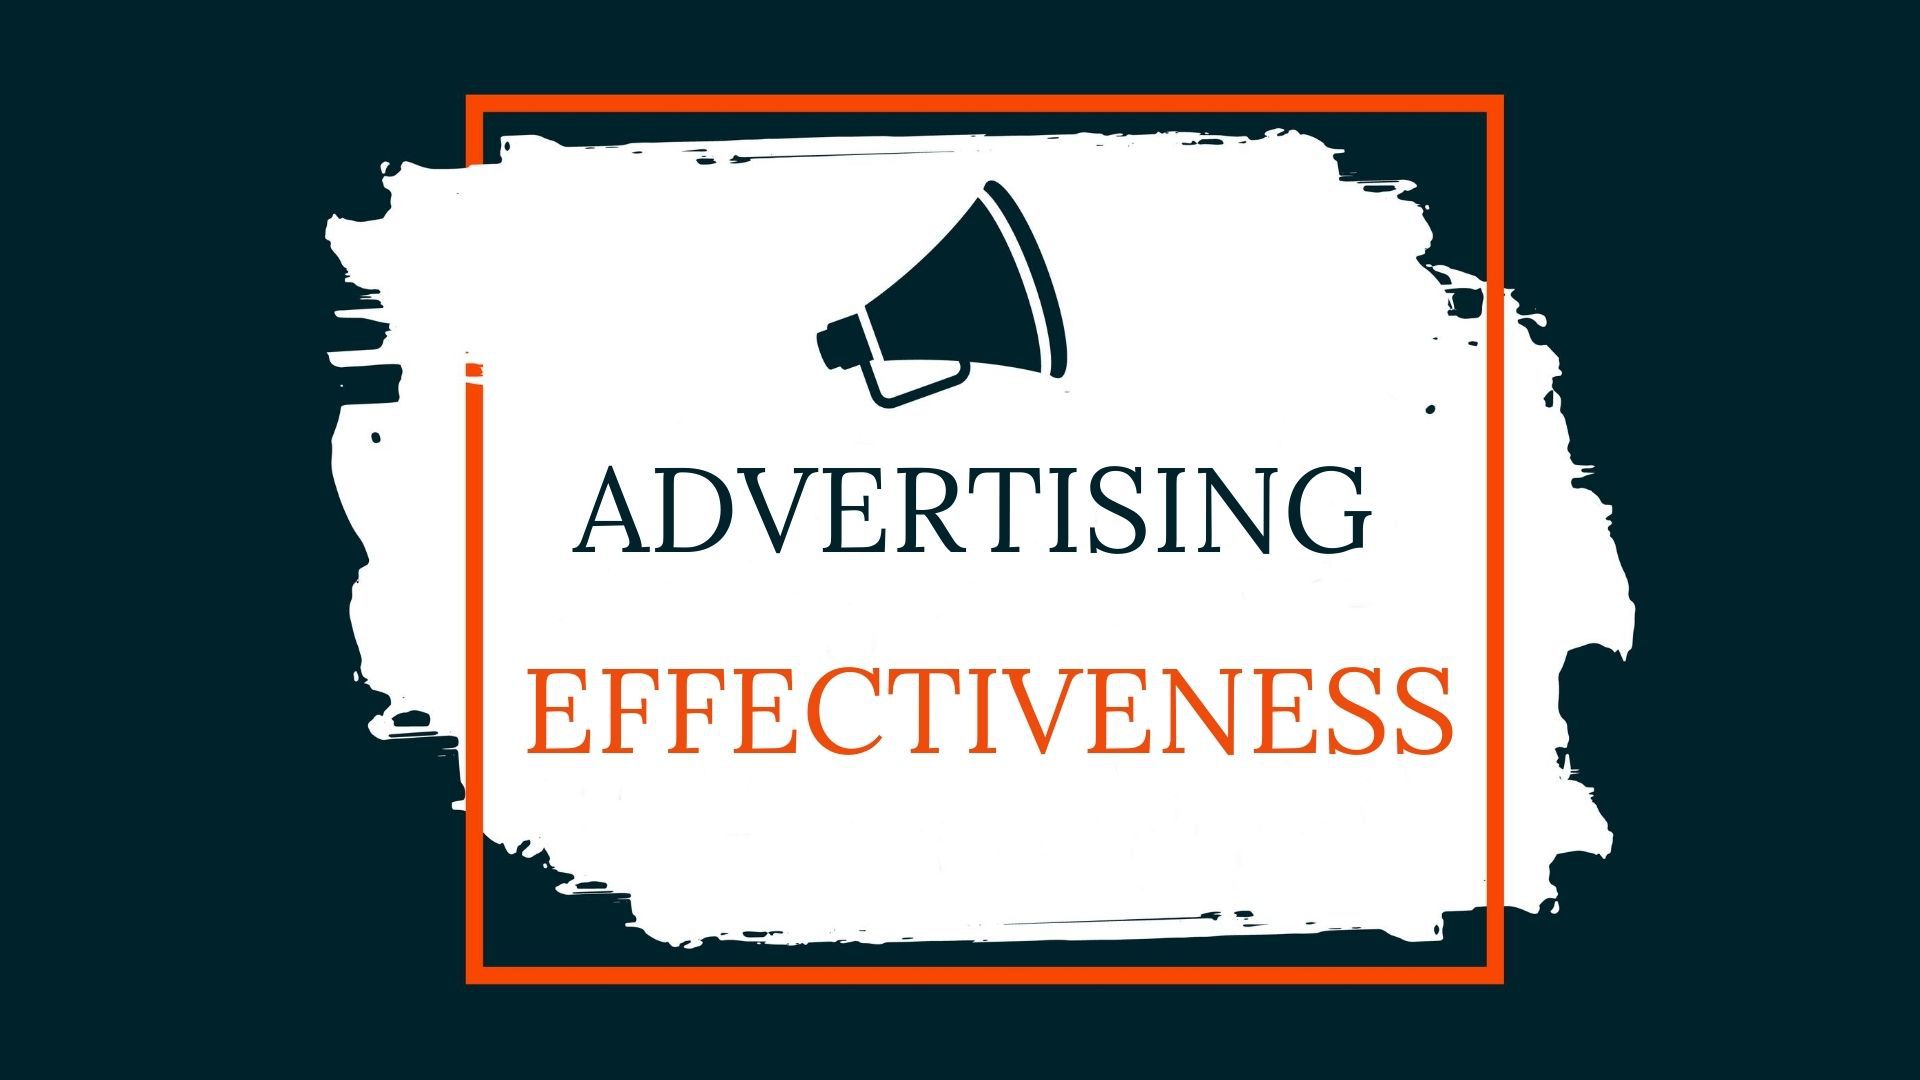 How to Measure Advertising Effectiveness for Your Business